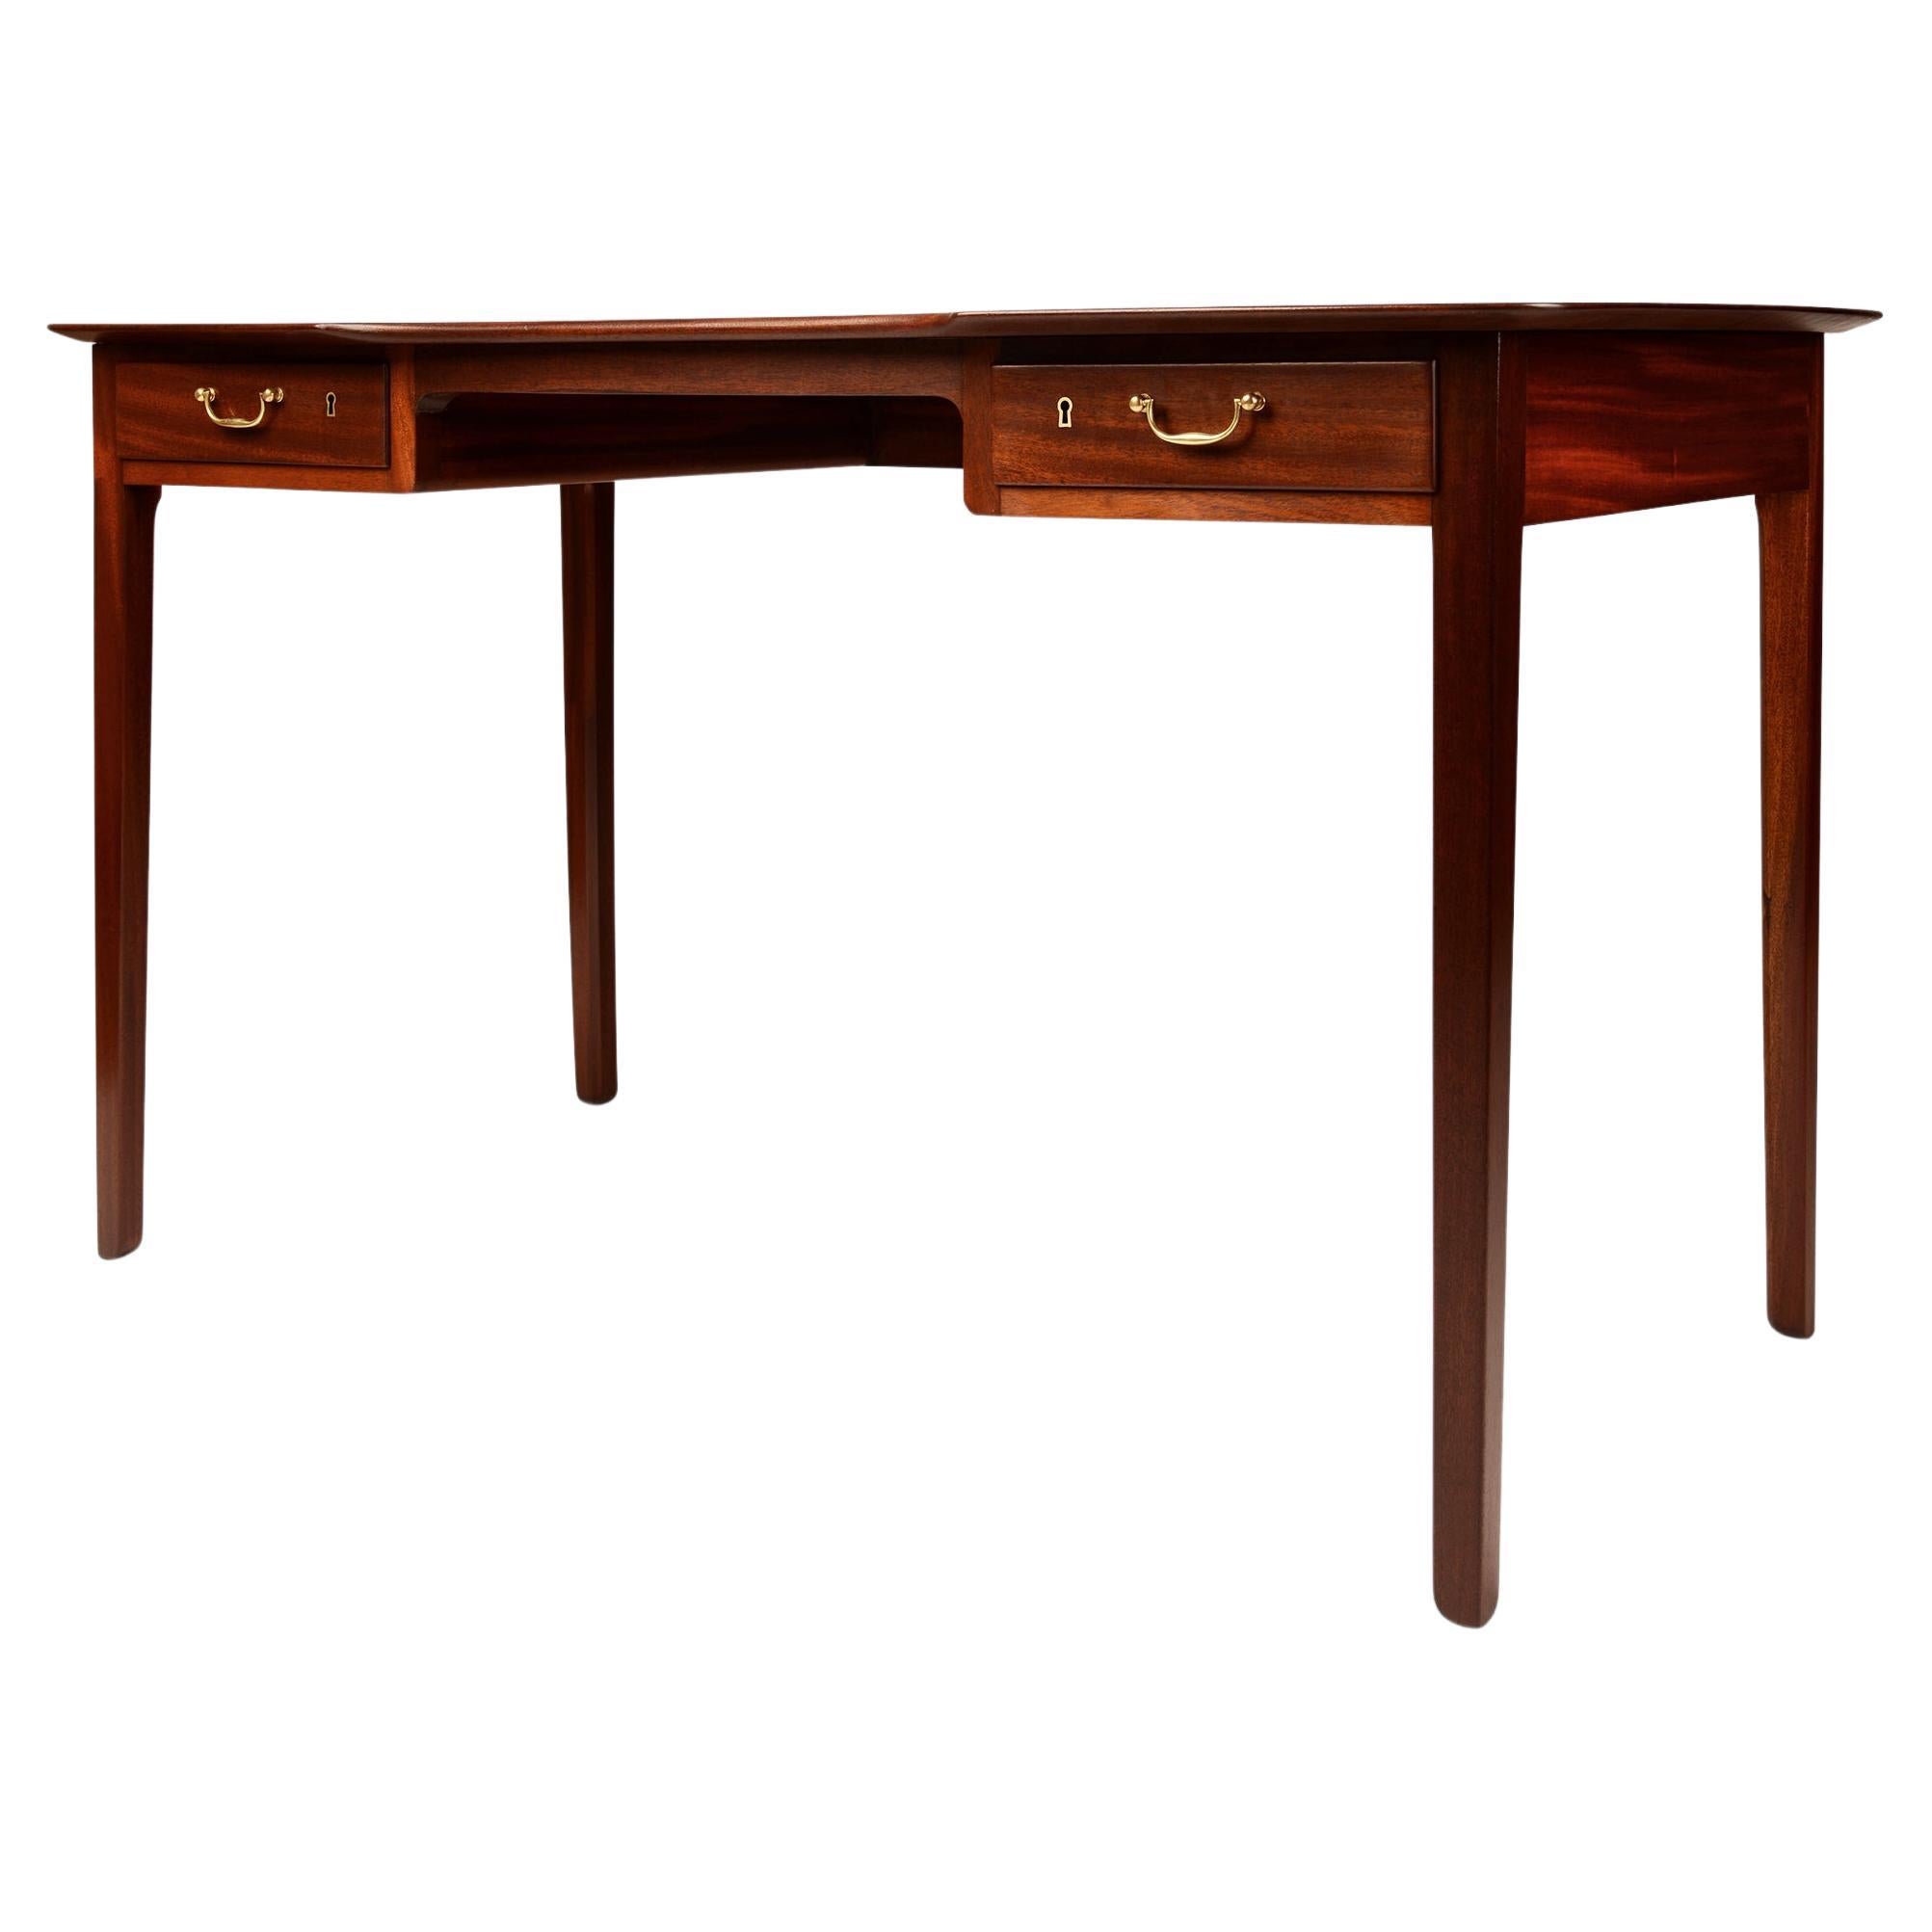 Smaller Danish Lady’s writing desk in mahogany with drawers and brass details